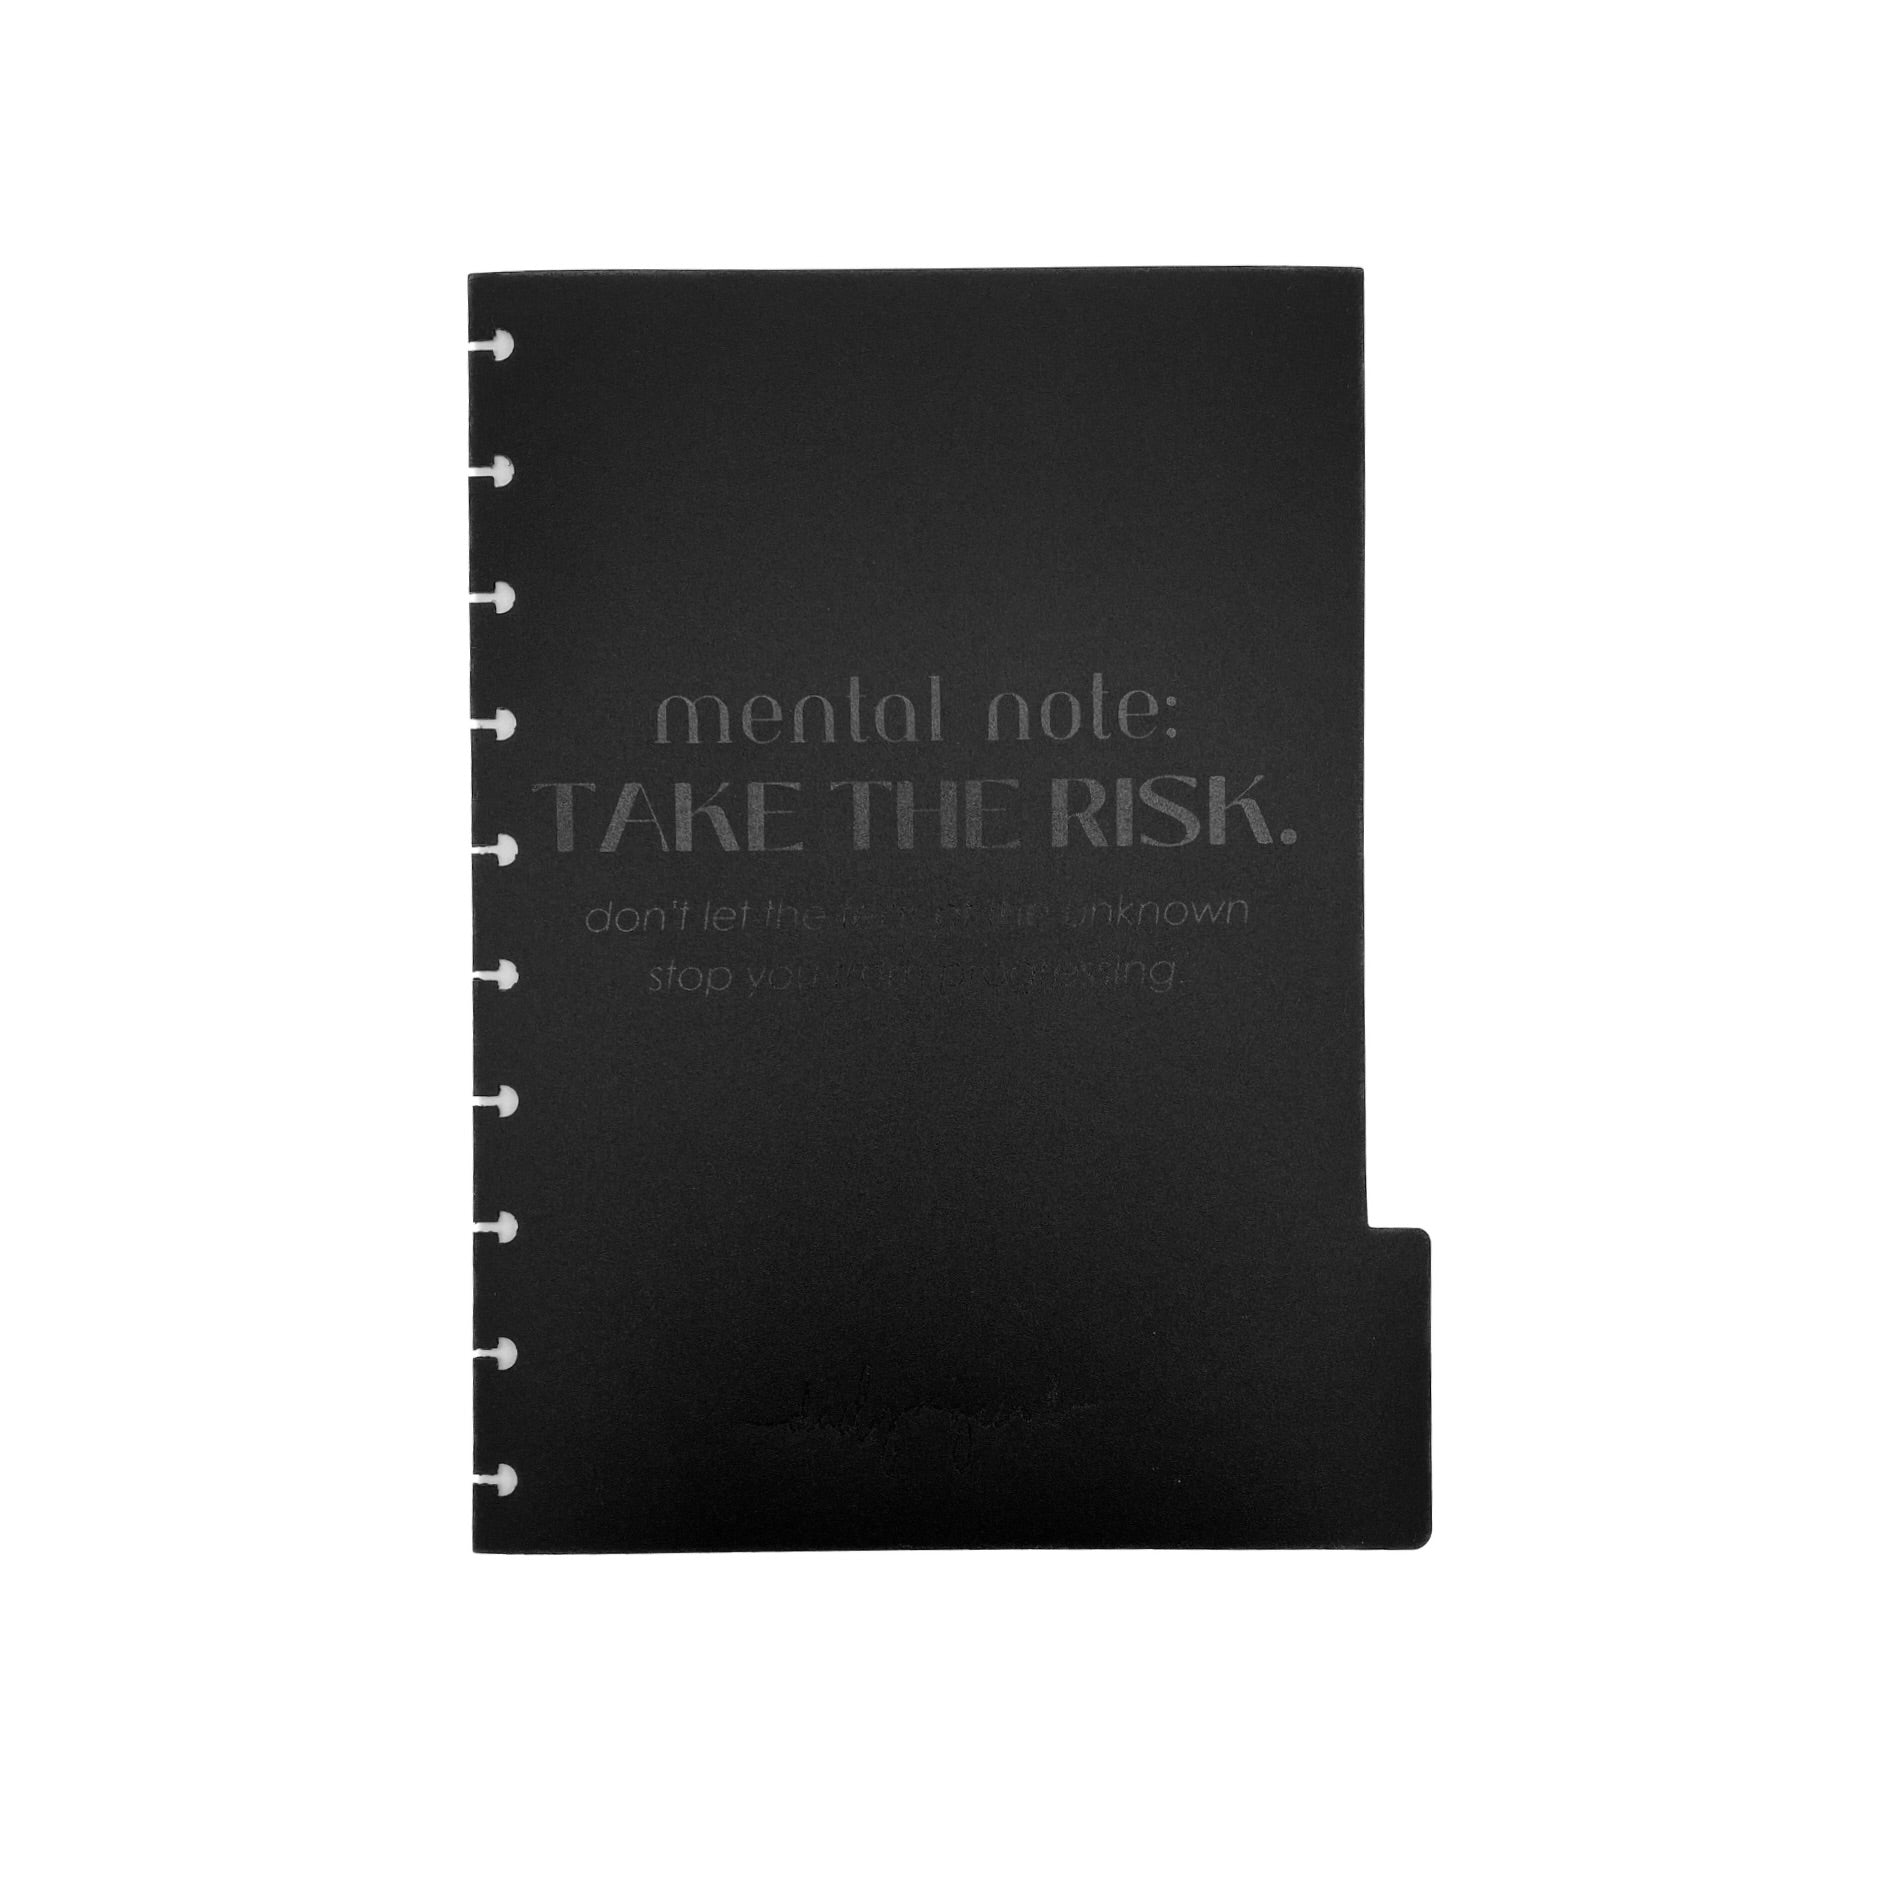 "Mental note: take the risk. Don't let the fear of the unknown stop you from progressing" black planner divider